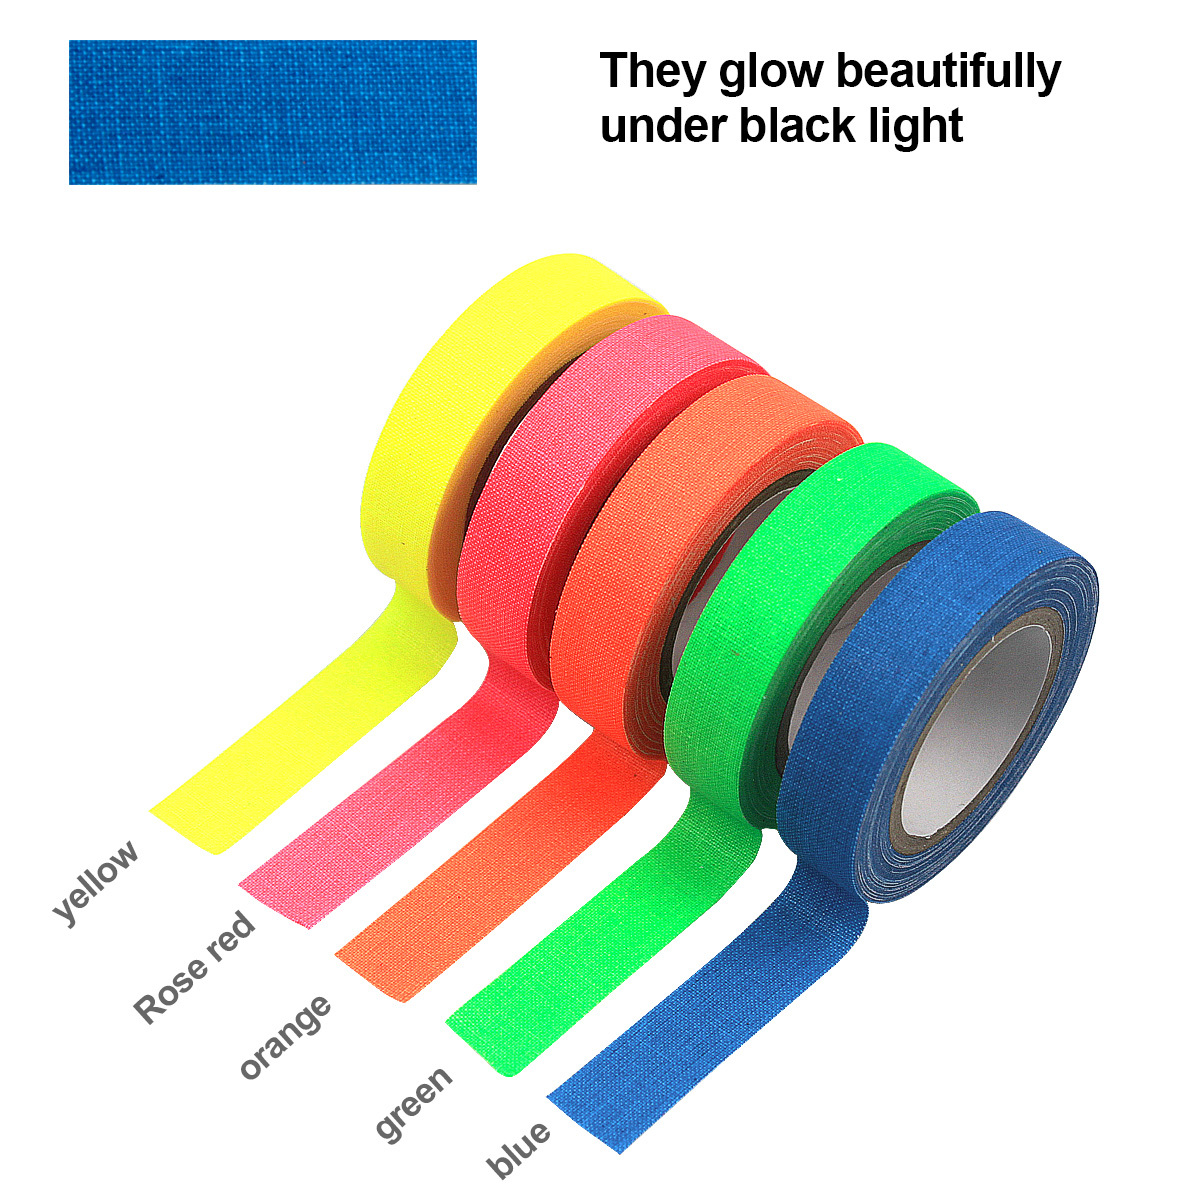 Kitwis Glow Neon Party Supplies, 6 Colors/6Rolls Neon Gaffer Cloth Tape,12 Ft/2pcs Rectangle Neon Garland,60ft Paper UV Round Neon Garland Stars Neon